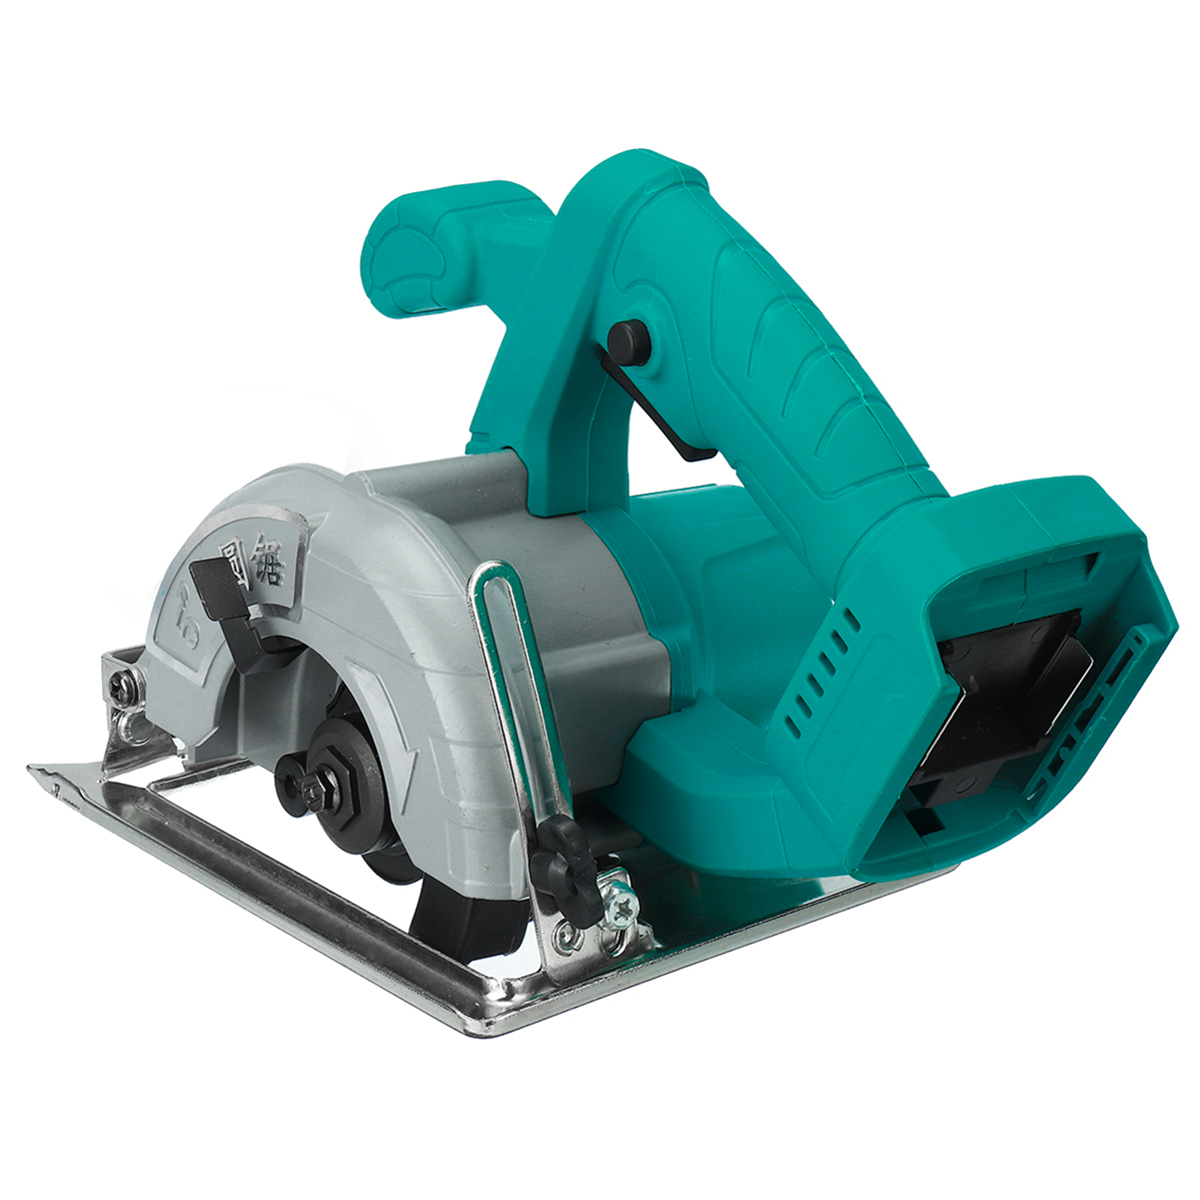 18V-Portable-Brushless-Electric-Circular-Saw-Cutting-Machine-Woodworking-Circular-Saw-Suitable-For-M-1726848-5